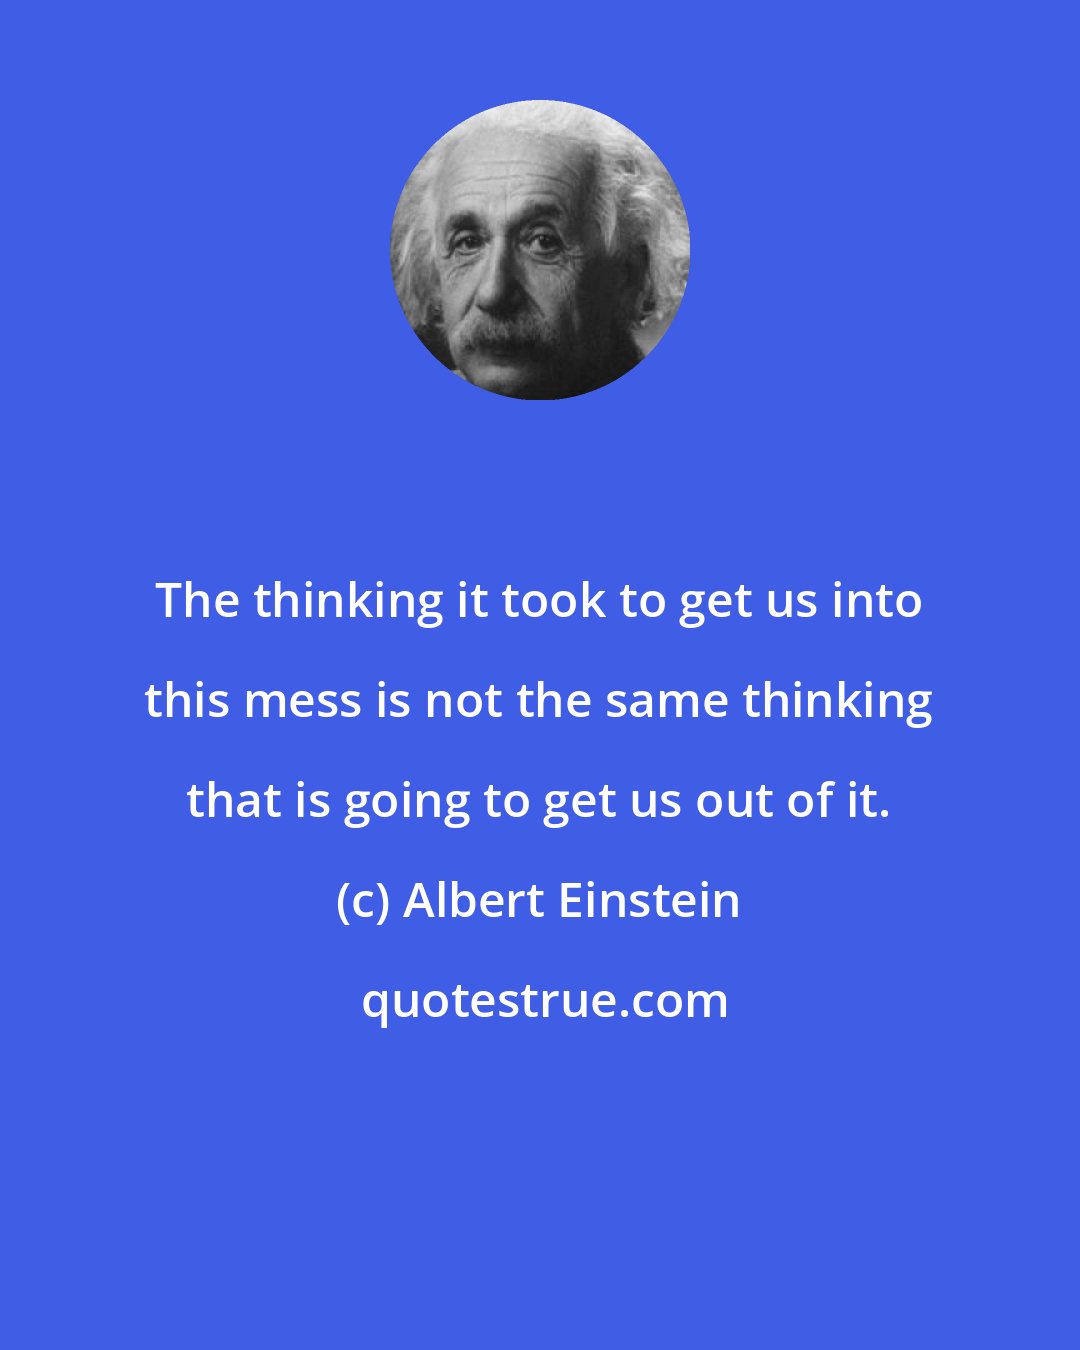 Albert Einstein: The thinking it took to get us into this mess is not the same thinking that is going to get us out of it.